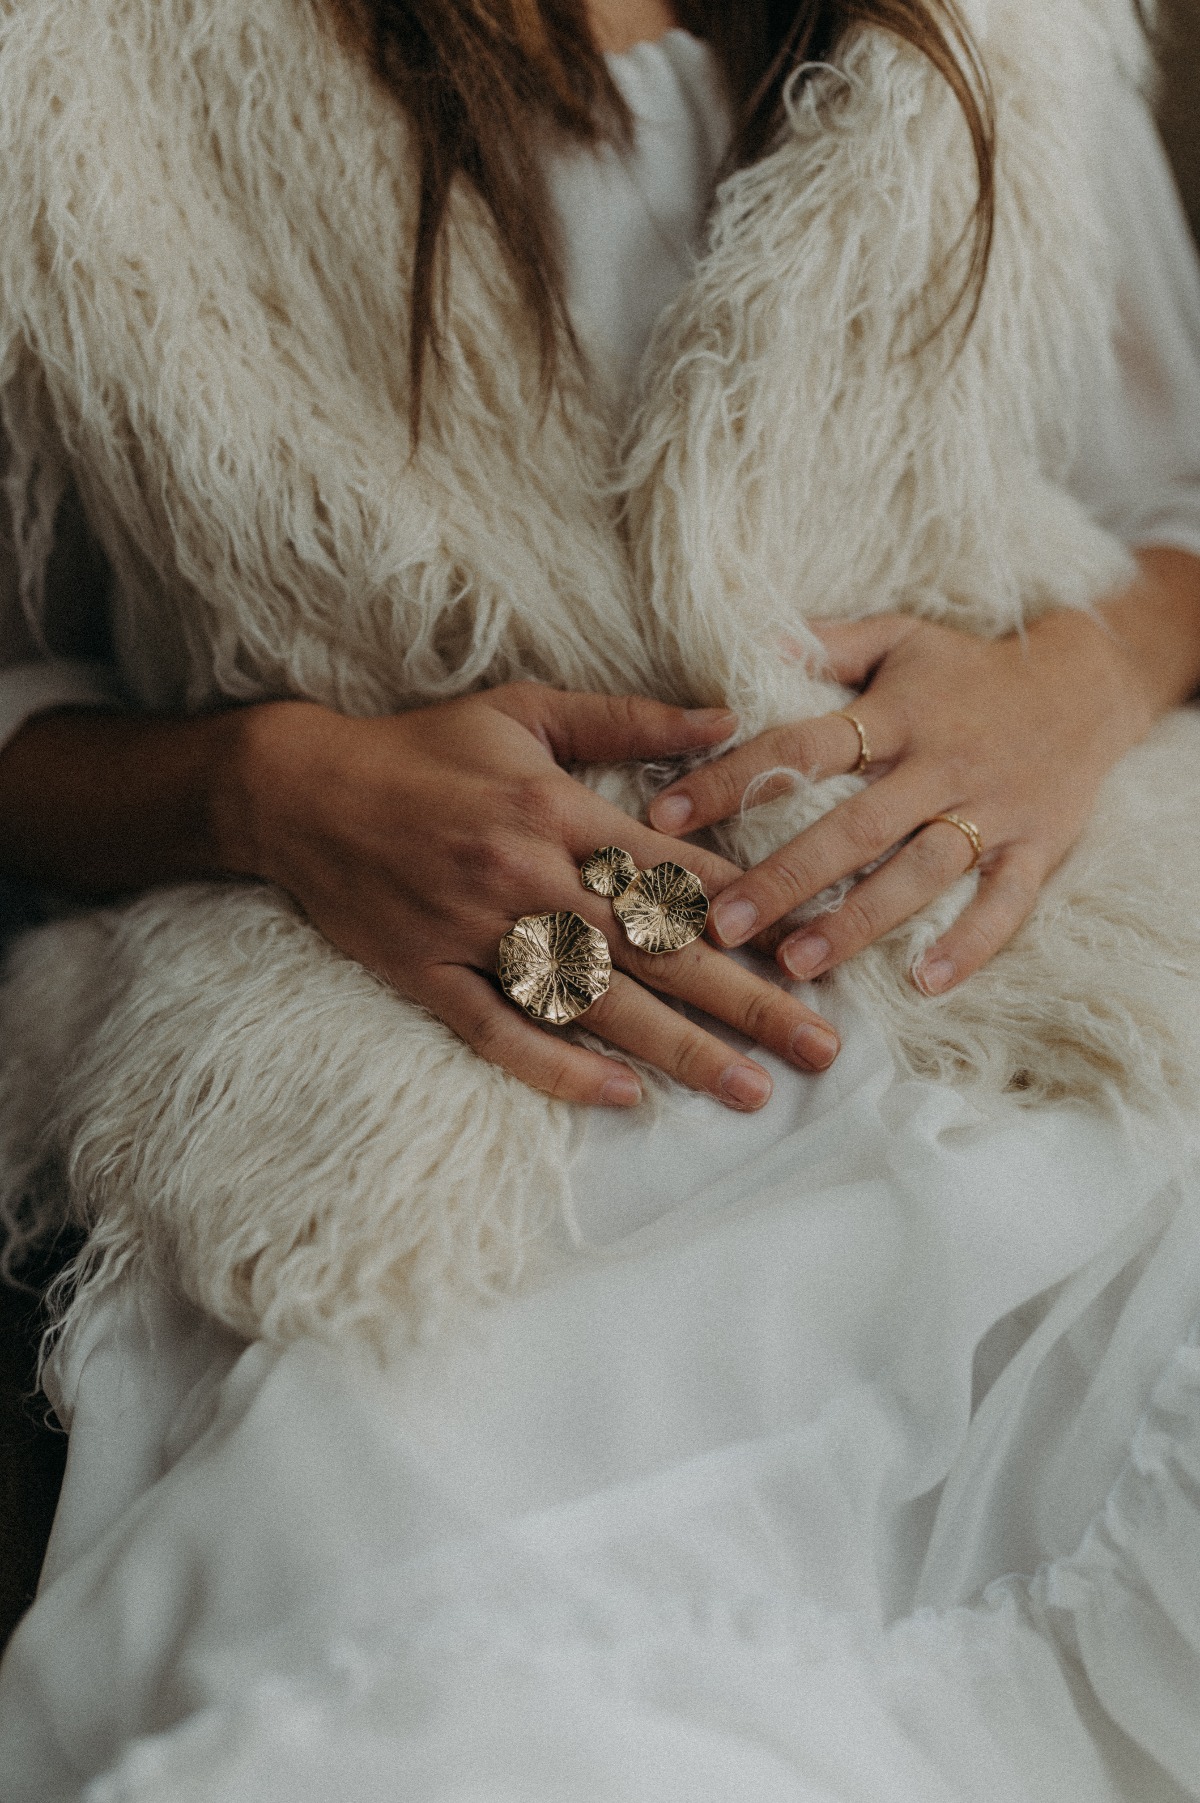 More is More In This Gypsy Inspired Elopement Shoot